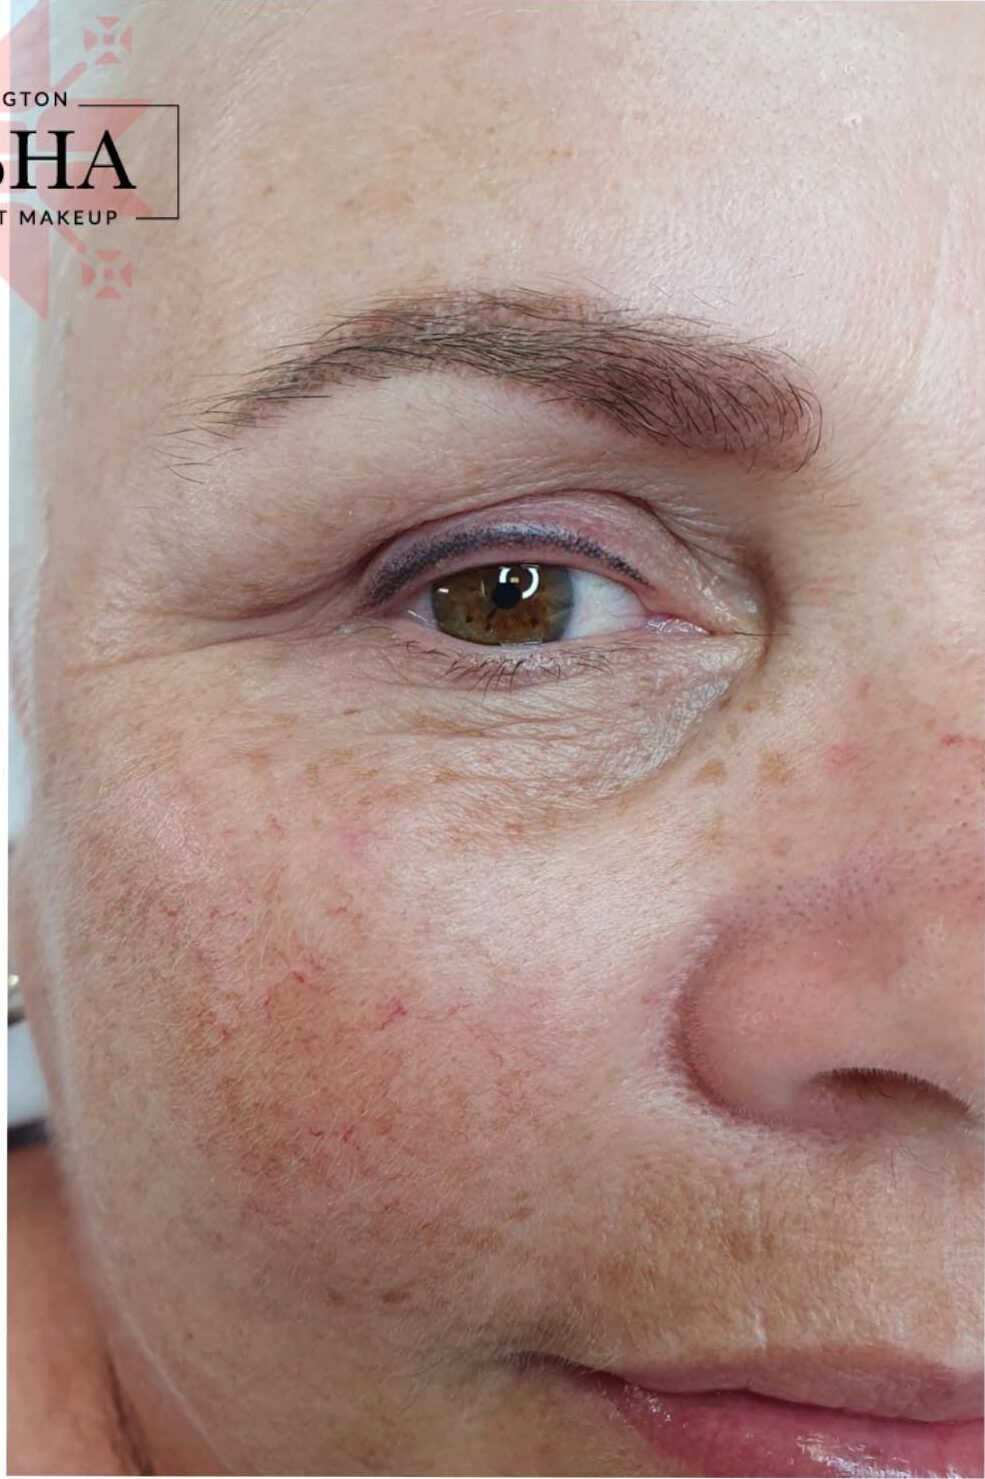 Alopecia, Eyeliner & Brows Cosmetic Tattoo. Cosmetic and Mediical Tattoo by Dasha. Permanent makeup and reconstructive tattoo, scalp micro-pigmentation in Christchurch, New Zealand